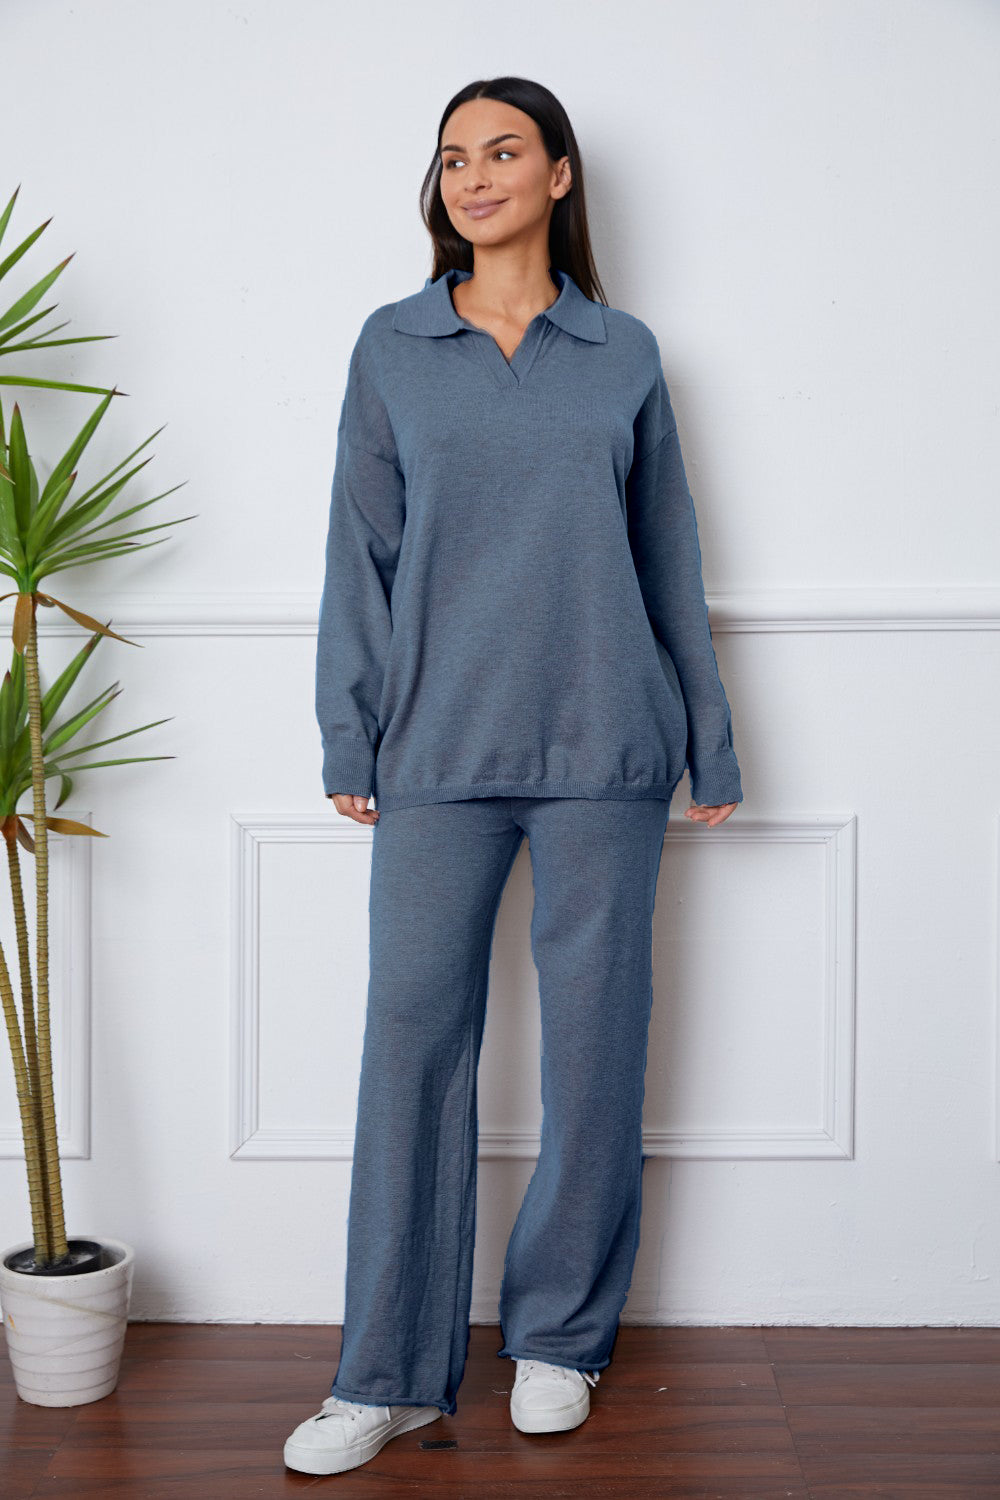 Women's Dropped Shoulder Sweater and Long Pants Set French Blue One Size